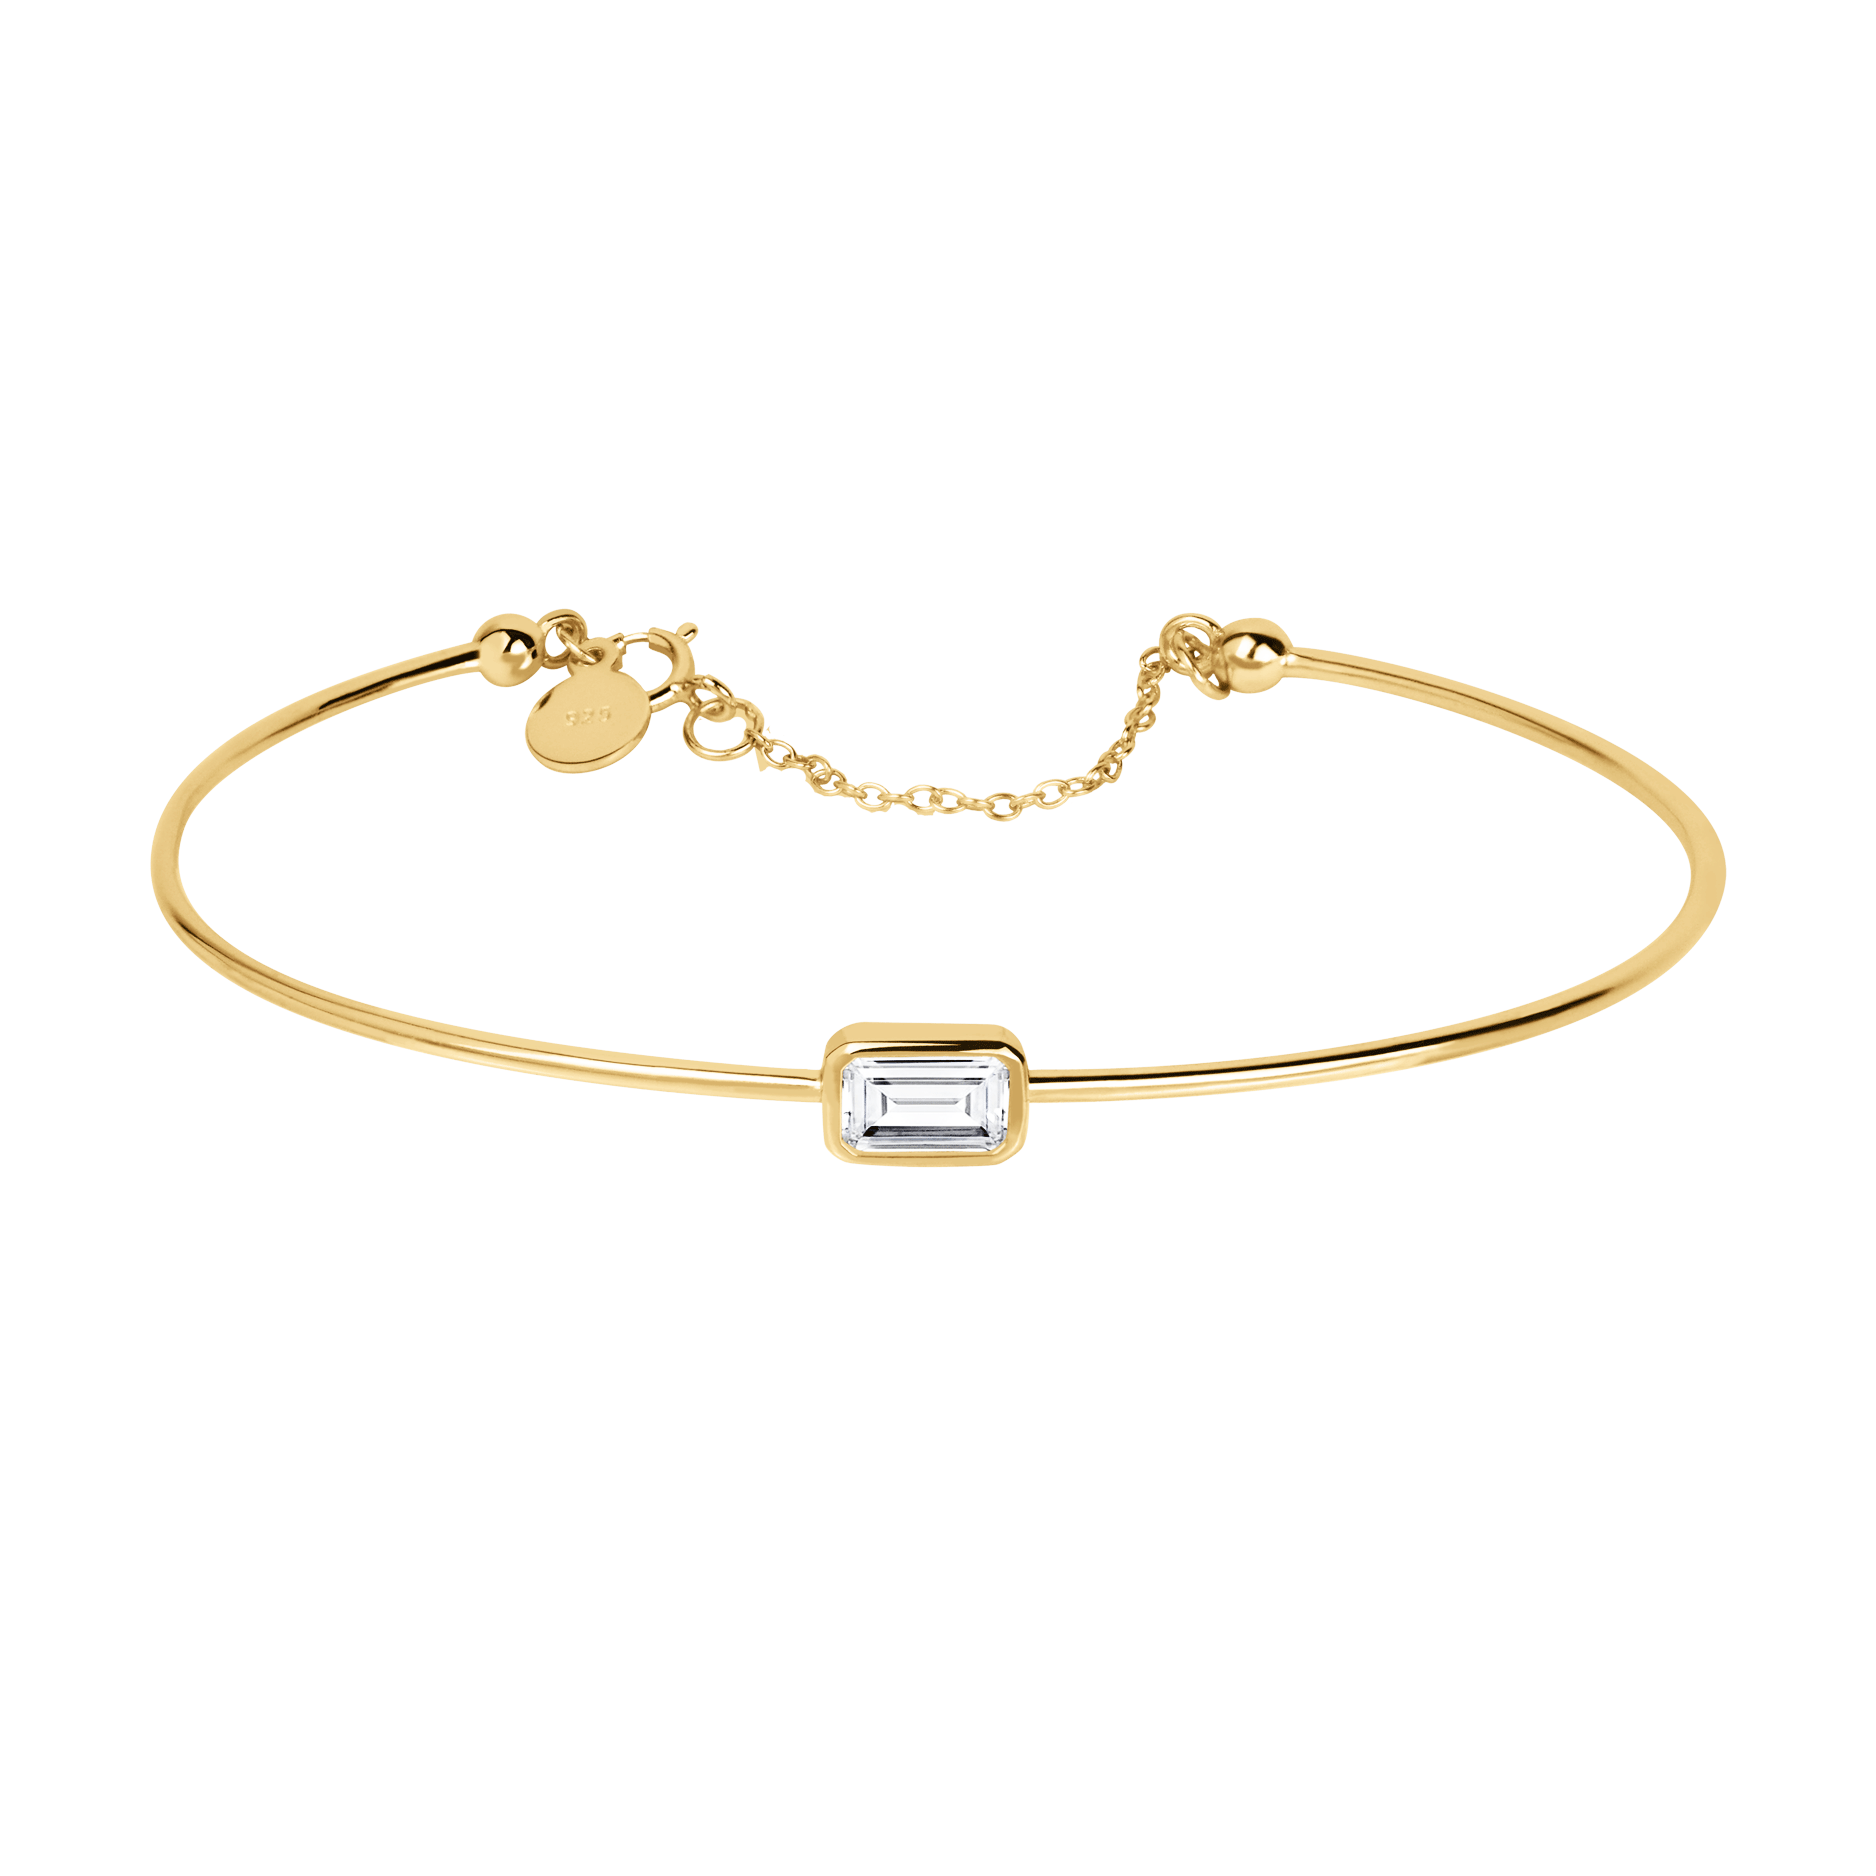 Tender Objects New Light Demi bracelet - Elegant design with emerald-cut stone. Elevate your style with modern sophistication.